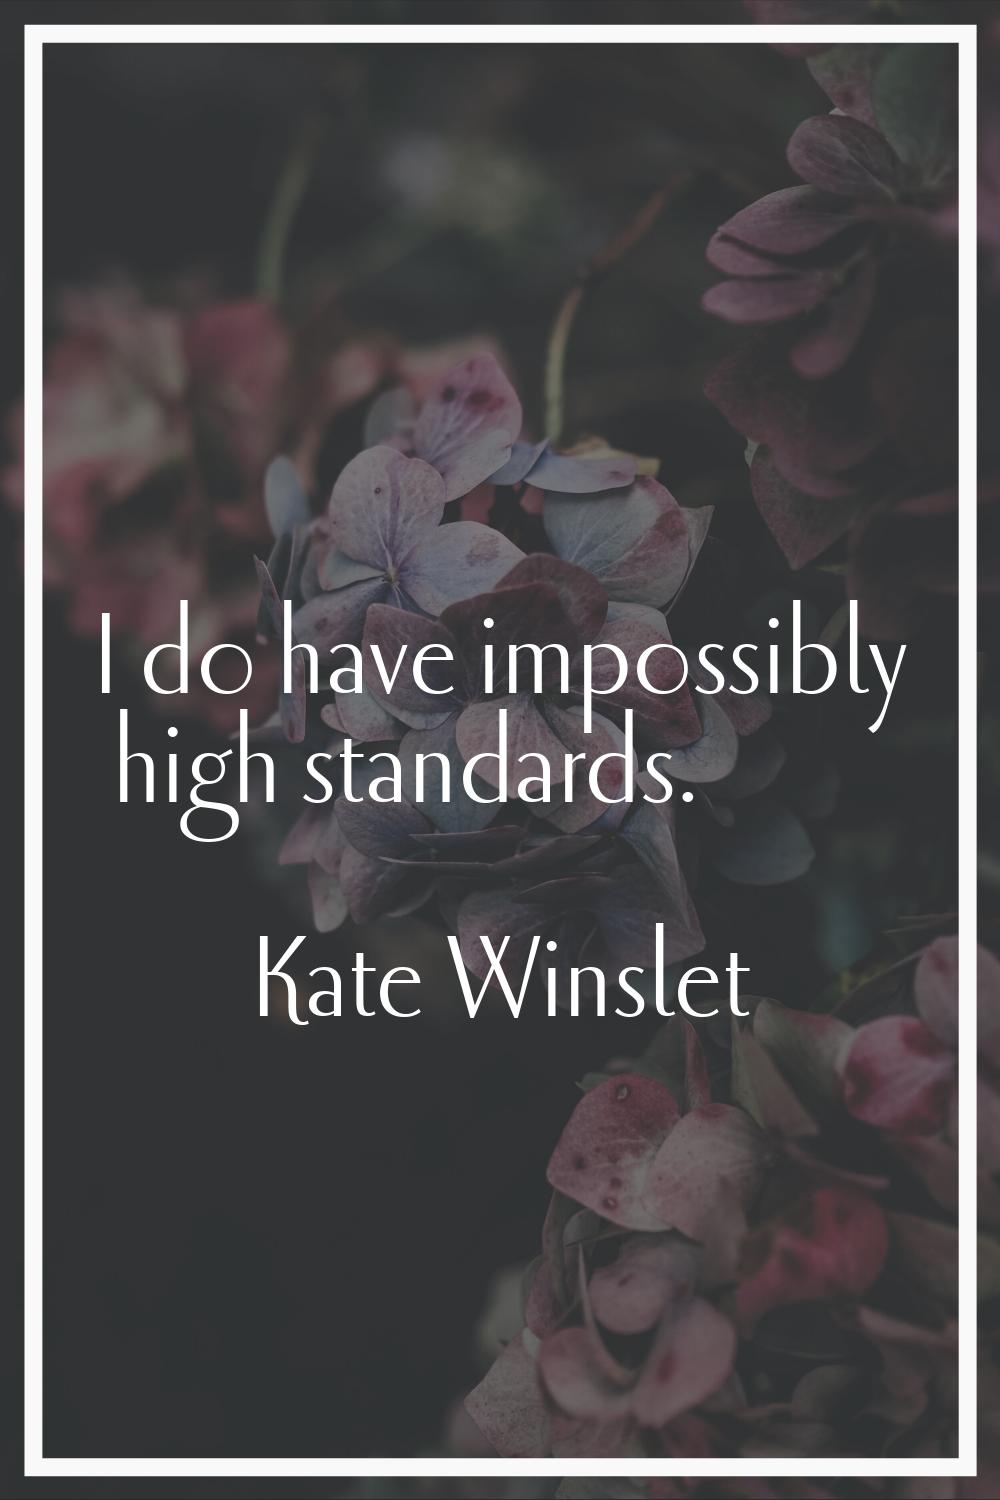 I do have impossibly high standards.